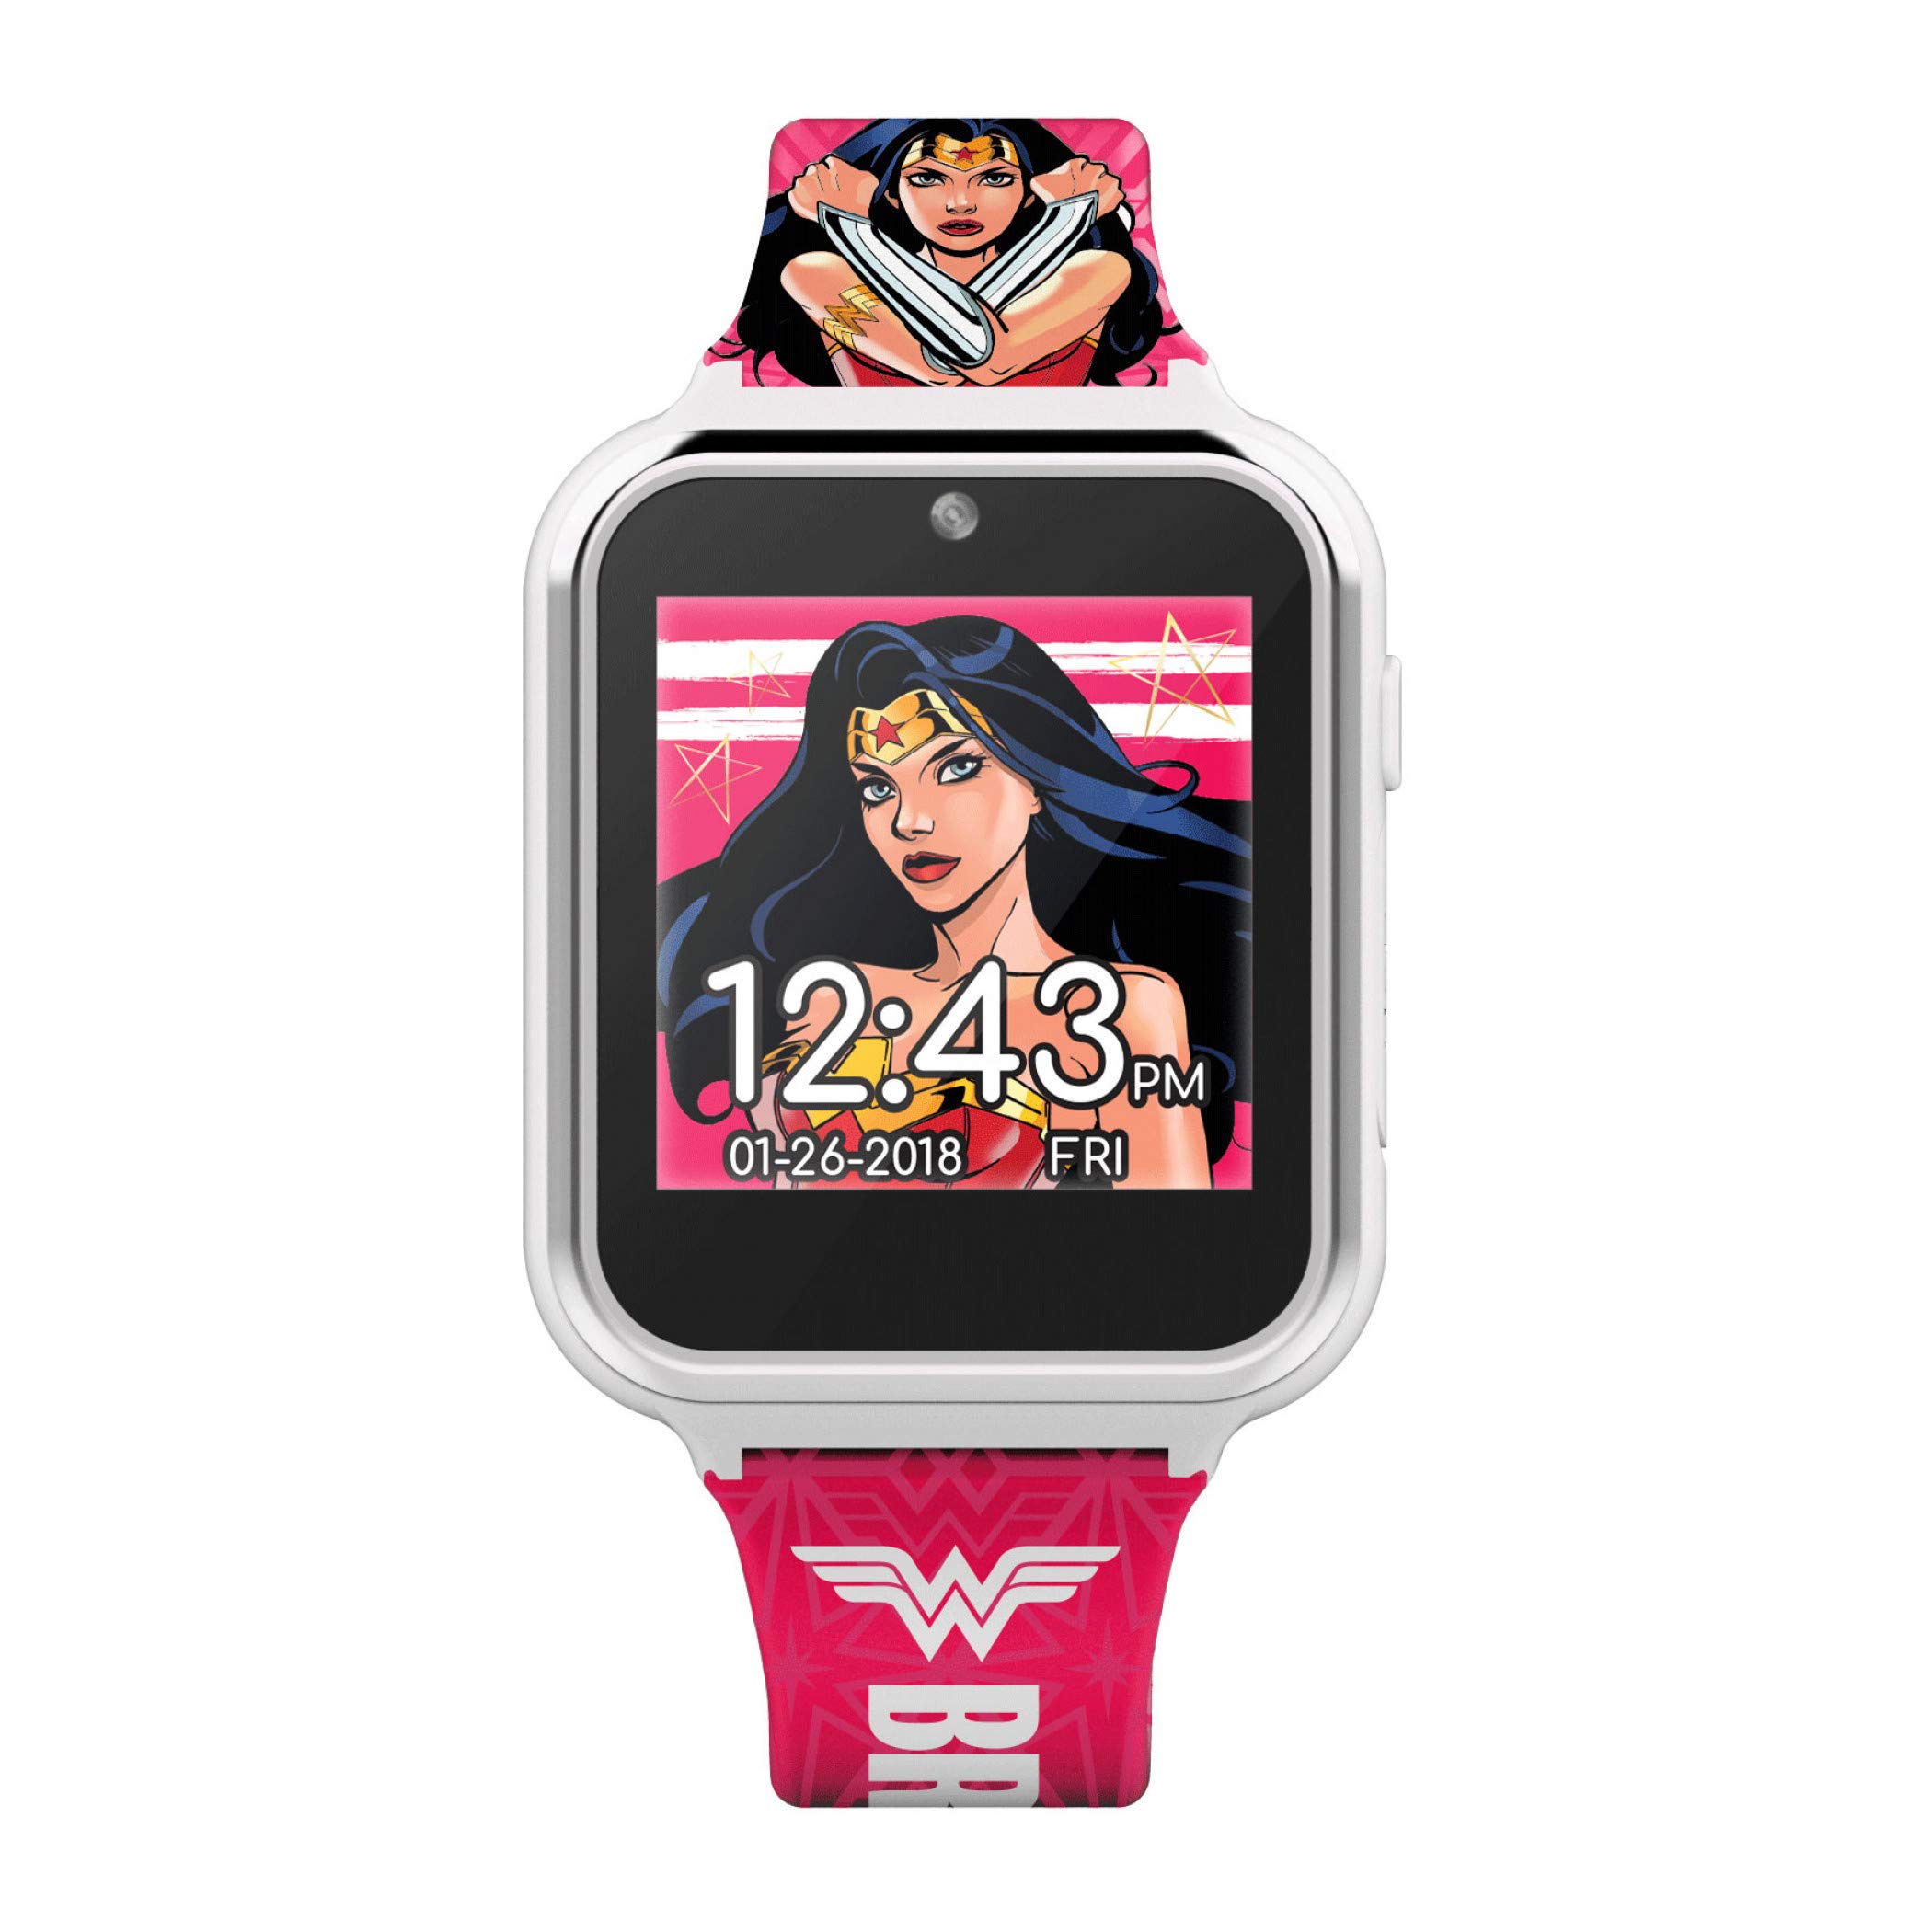 Accutime Kids DC Comics Wonder Woman Pink Educational Learning Touchscreen Smart Watch Toy for Girls, Boys, Toddlers - Selfie Cam, Learning Games, Alarm, Calculator, Pedometer (Model: WOW4195AZ)